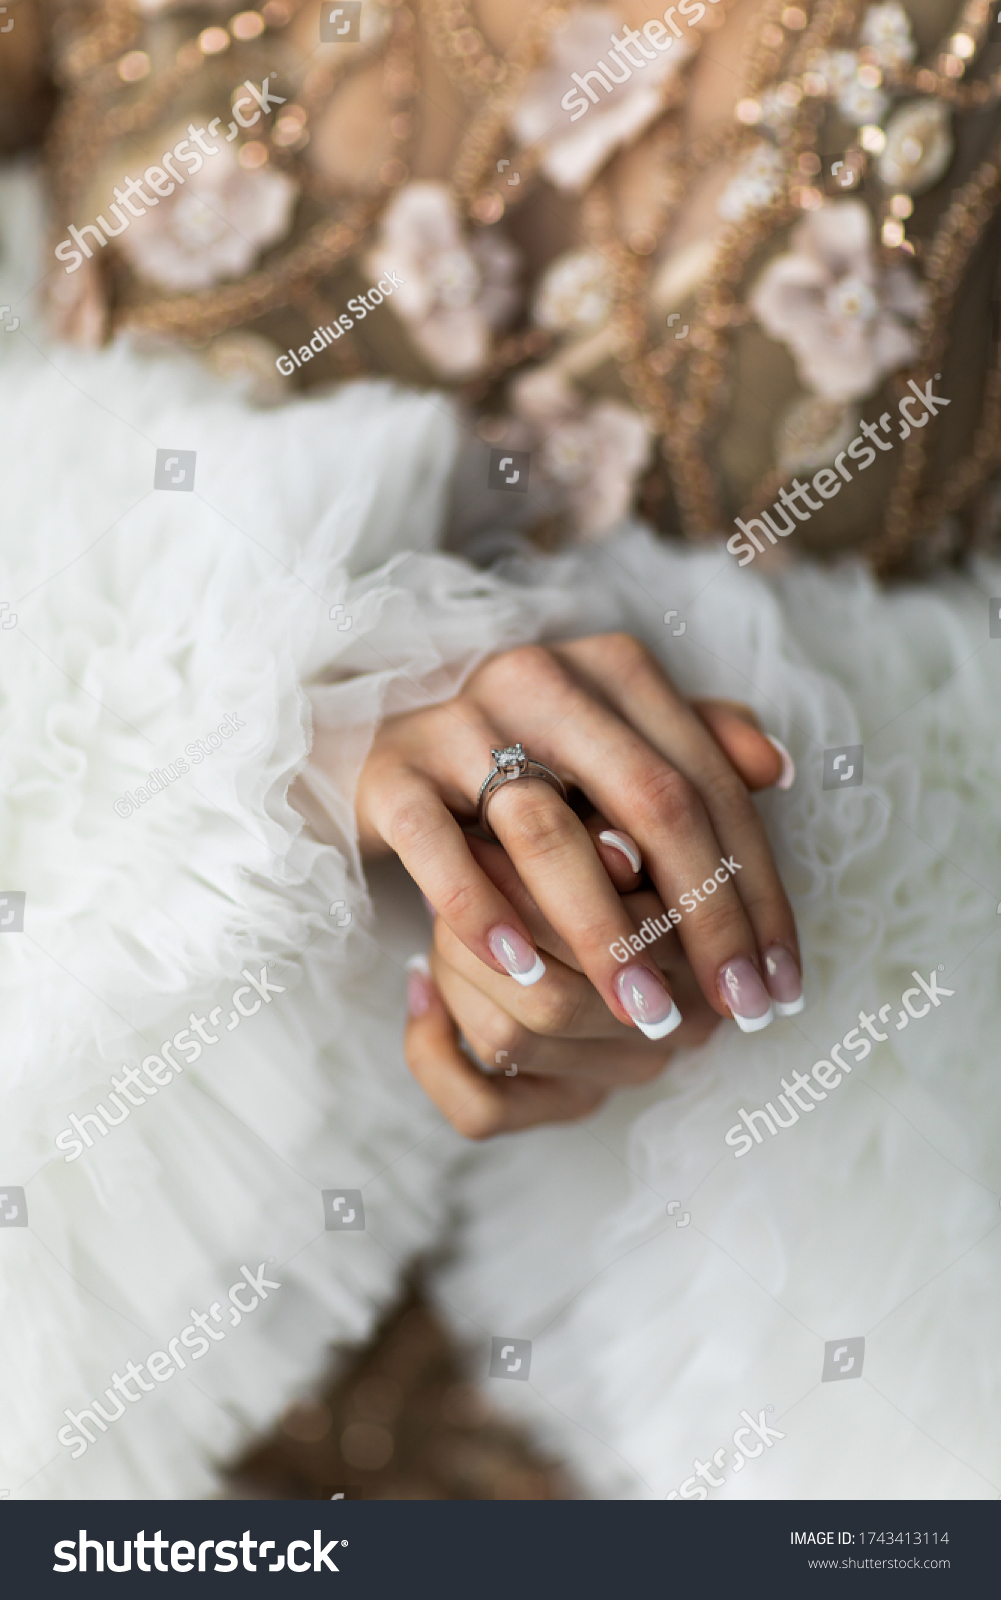 Couple. You can see the hands of woman. Sensually.Focus on the wedding ring #1743413114